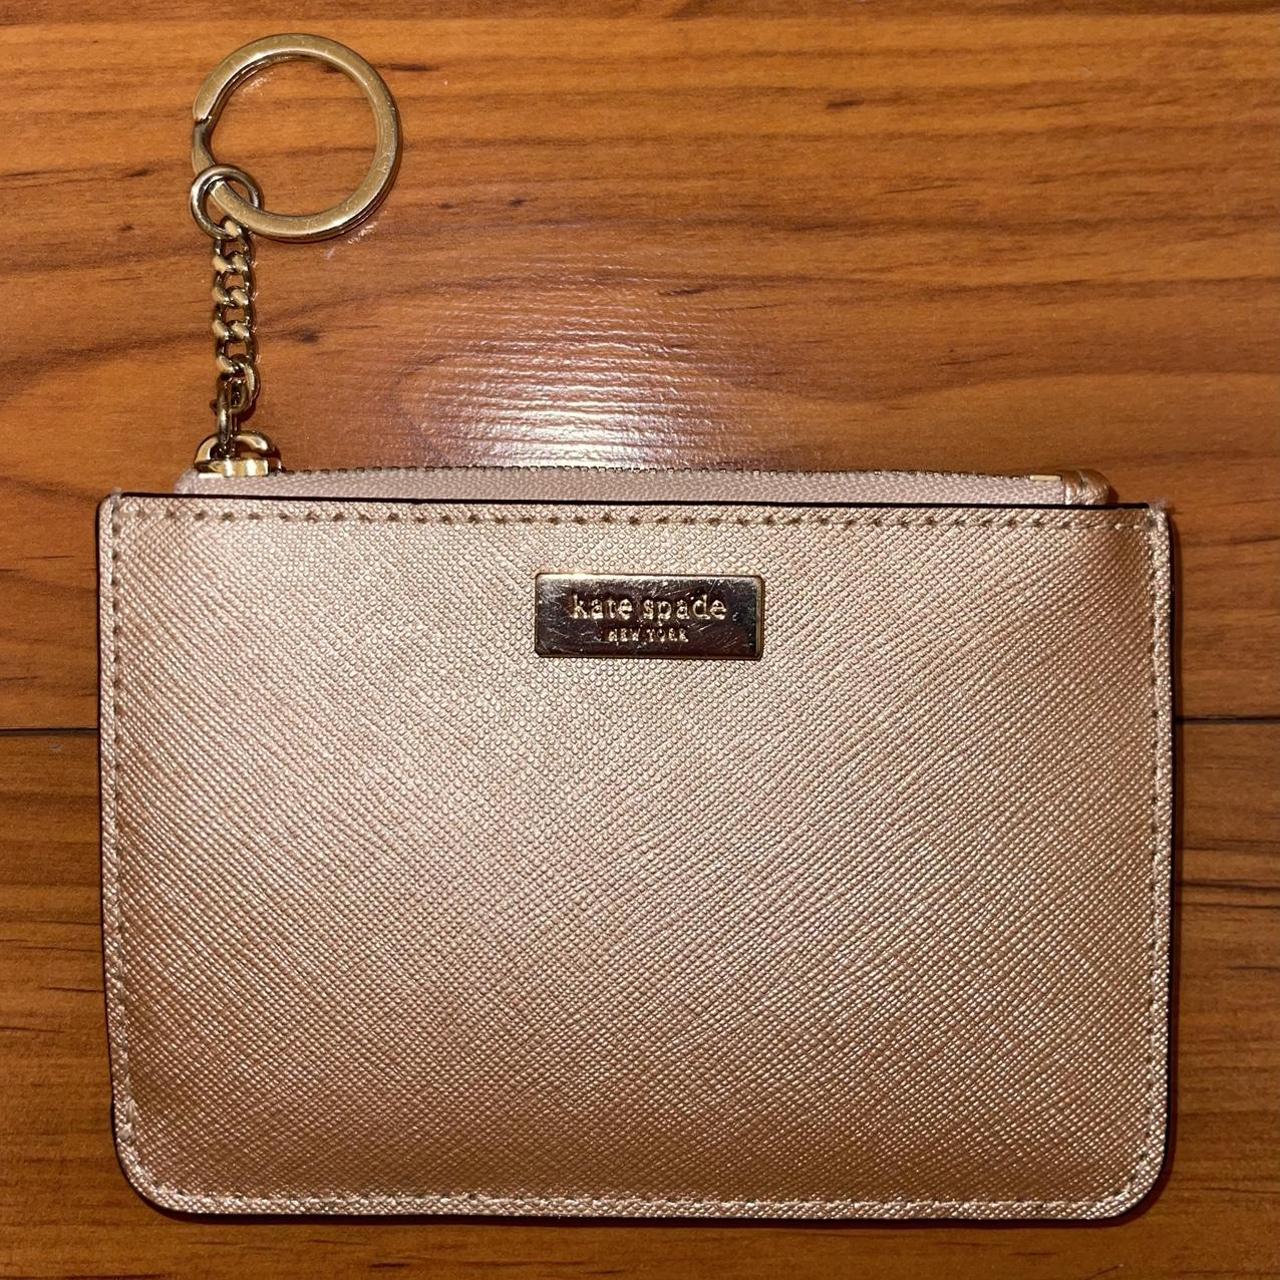 kate spade card holder keychain wallet leather